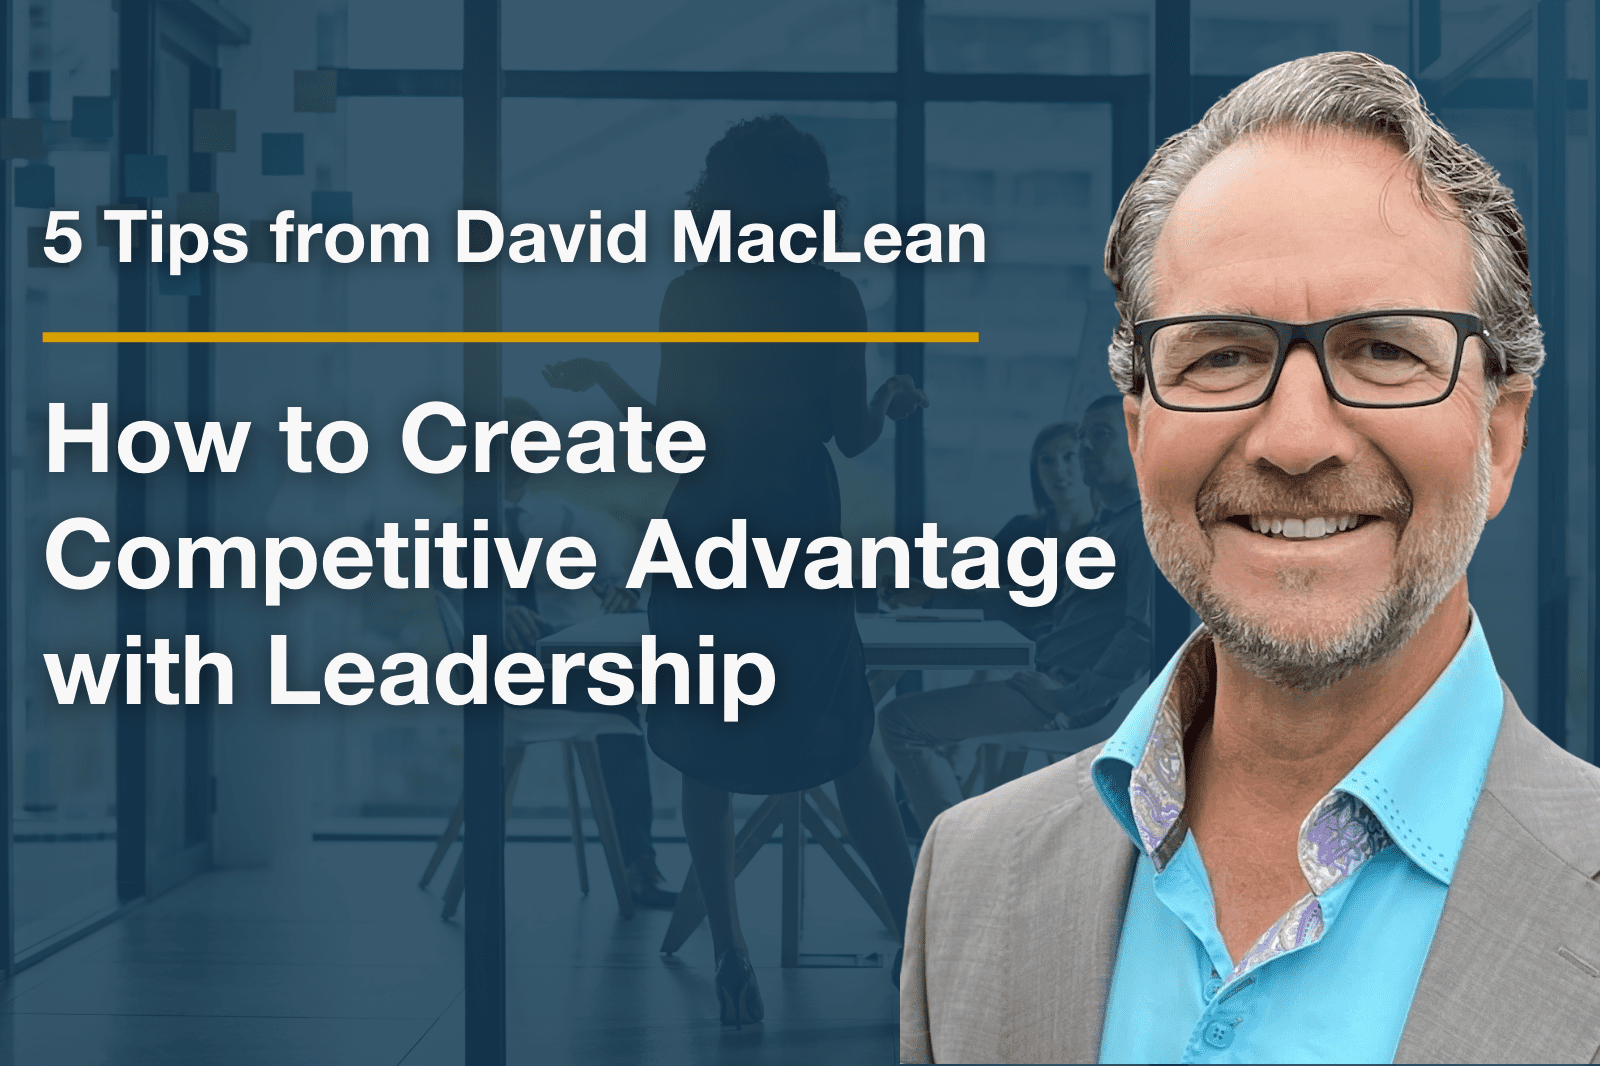 5 Tips from David MacLean: How to Create a Competitive Advantage with Leadership